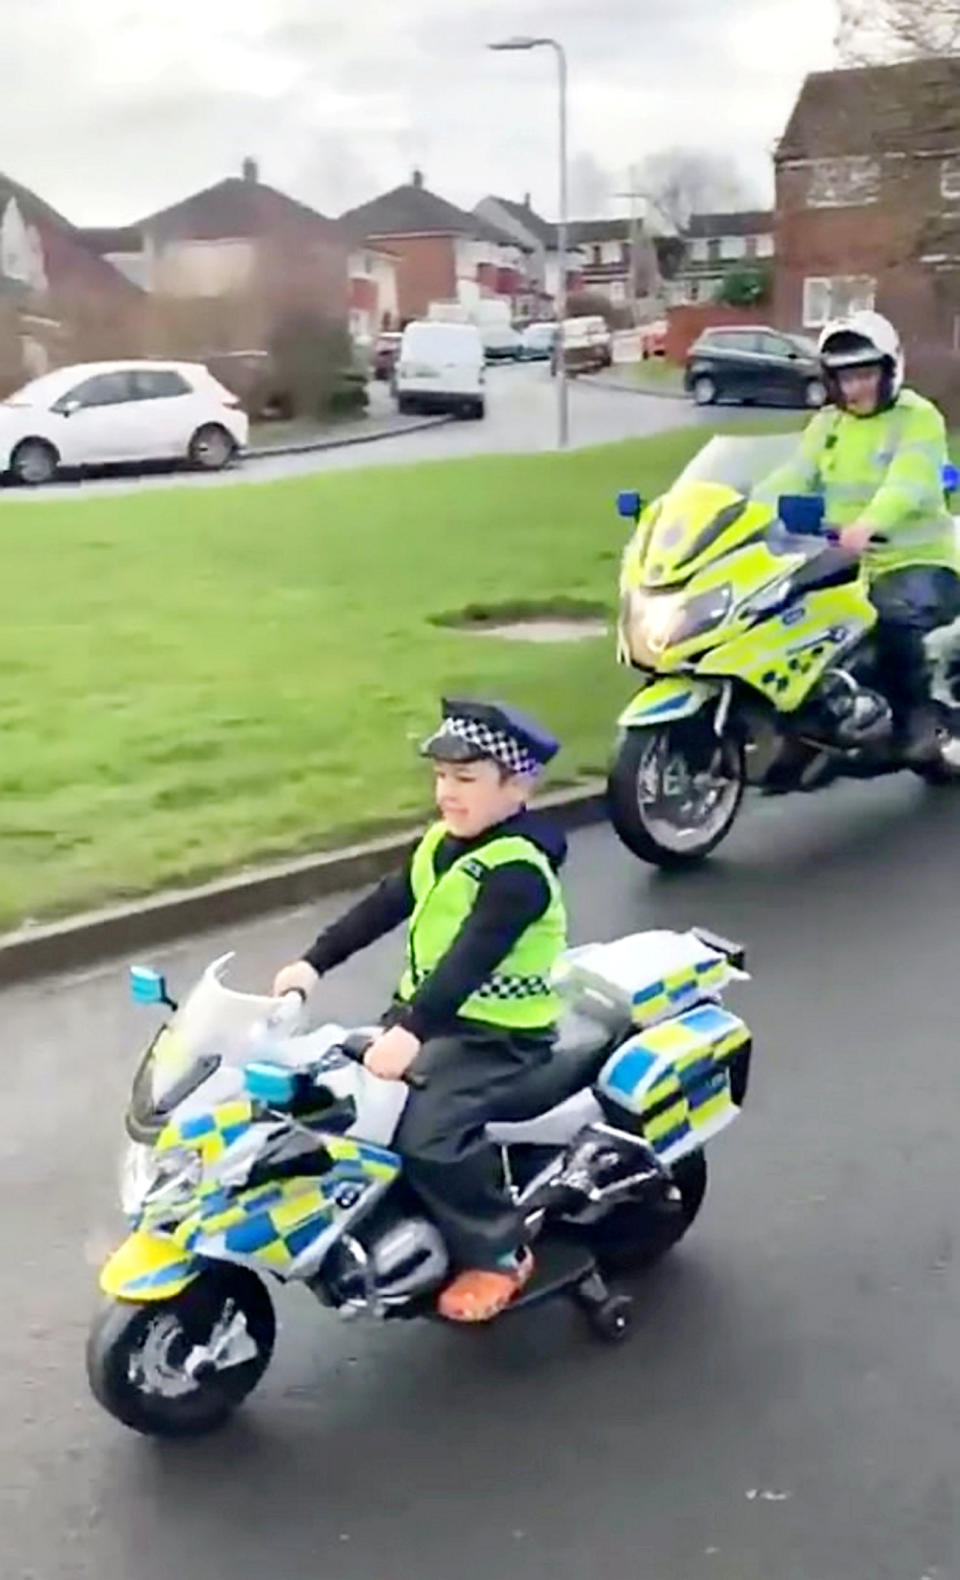 A five-year-old boy who is mourning the loss of his father made his dream come true when he became a volunteer motorcycle cop for the day.  See SWNS story SWSMcops.  Harry Farrell was heartbroken when his father Craig, a former England youth footballer, died suddenly aged just 39.  Craig, who won three caps for England U-16 and was also a striker for Carlisle United, York City and Whitby Town, died last May.  Little Harry, who dreams of becoming a police officer one day, asked Santa Claus for an electric police motorcycle for Christmas.  His dream of becoming a police officer came true last week when the Durham Constabulary's motorcycle department surprised him at his home.  Video shows Harry - Wearing a police uniform, he leads a four-man patrol through the streets of his Durham home.  The surprise was arranged by Harry's mother, Emma Overton. 